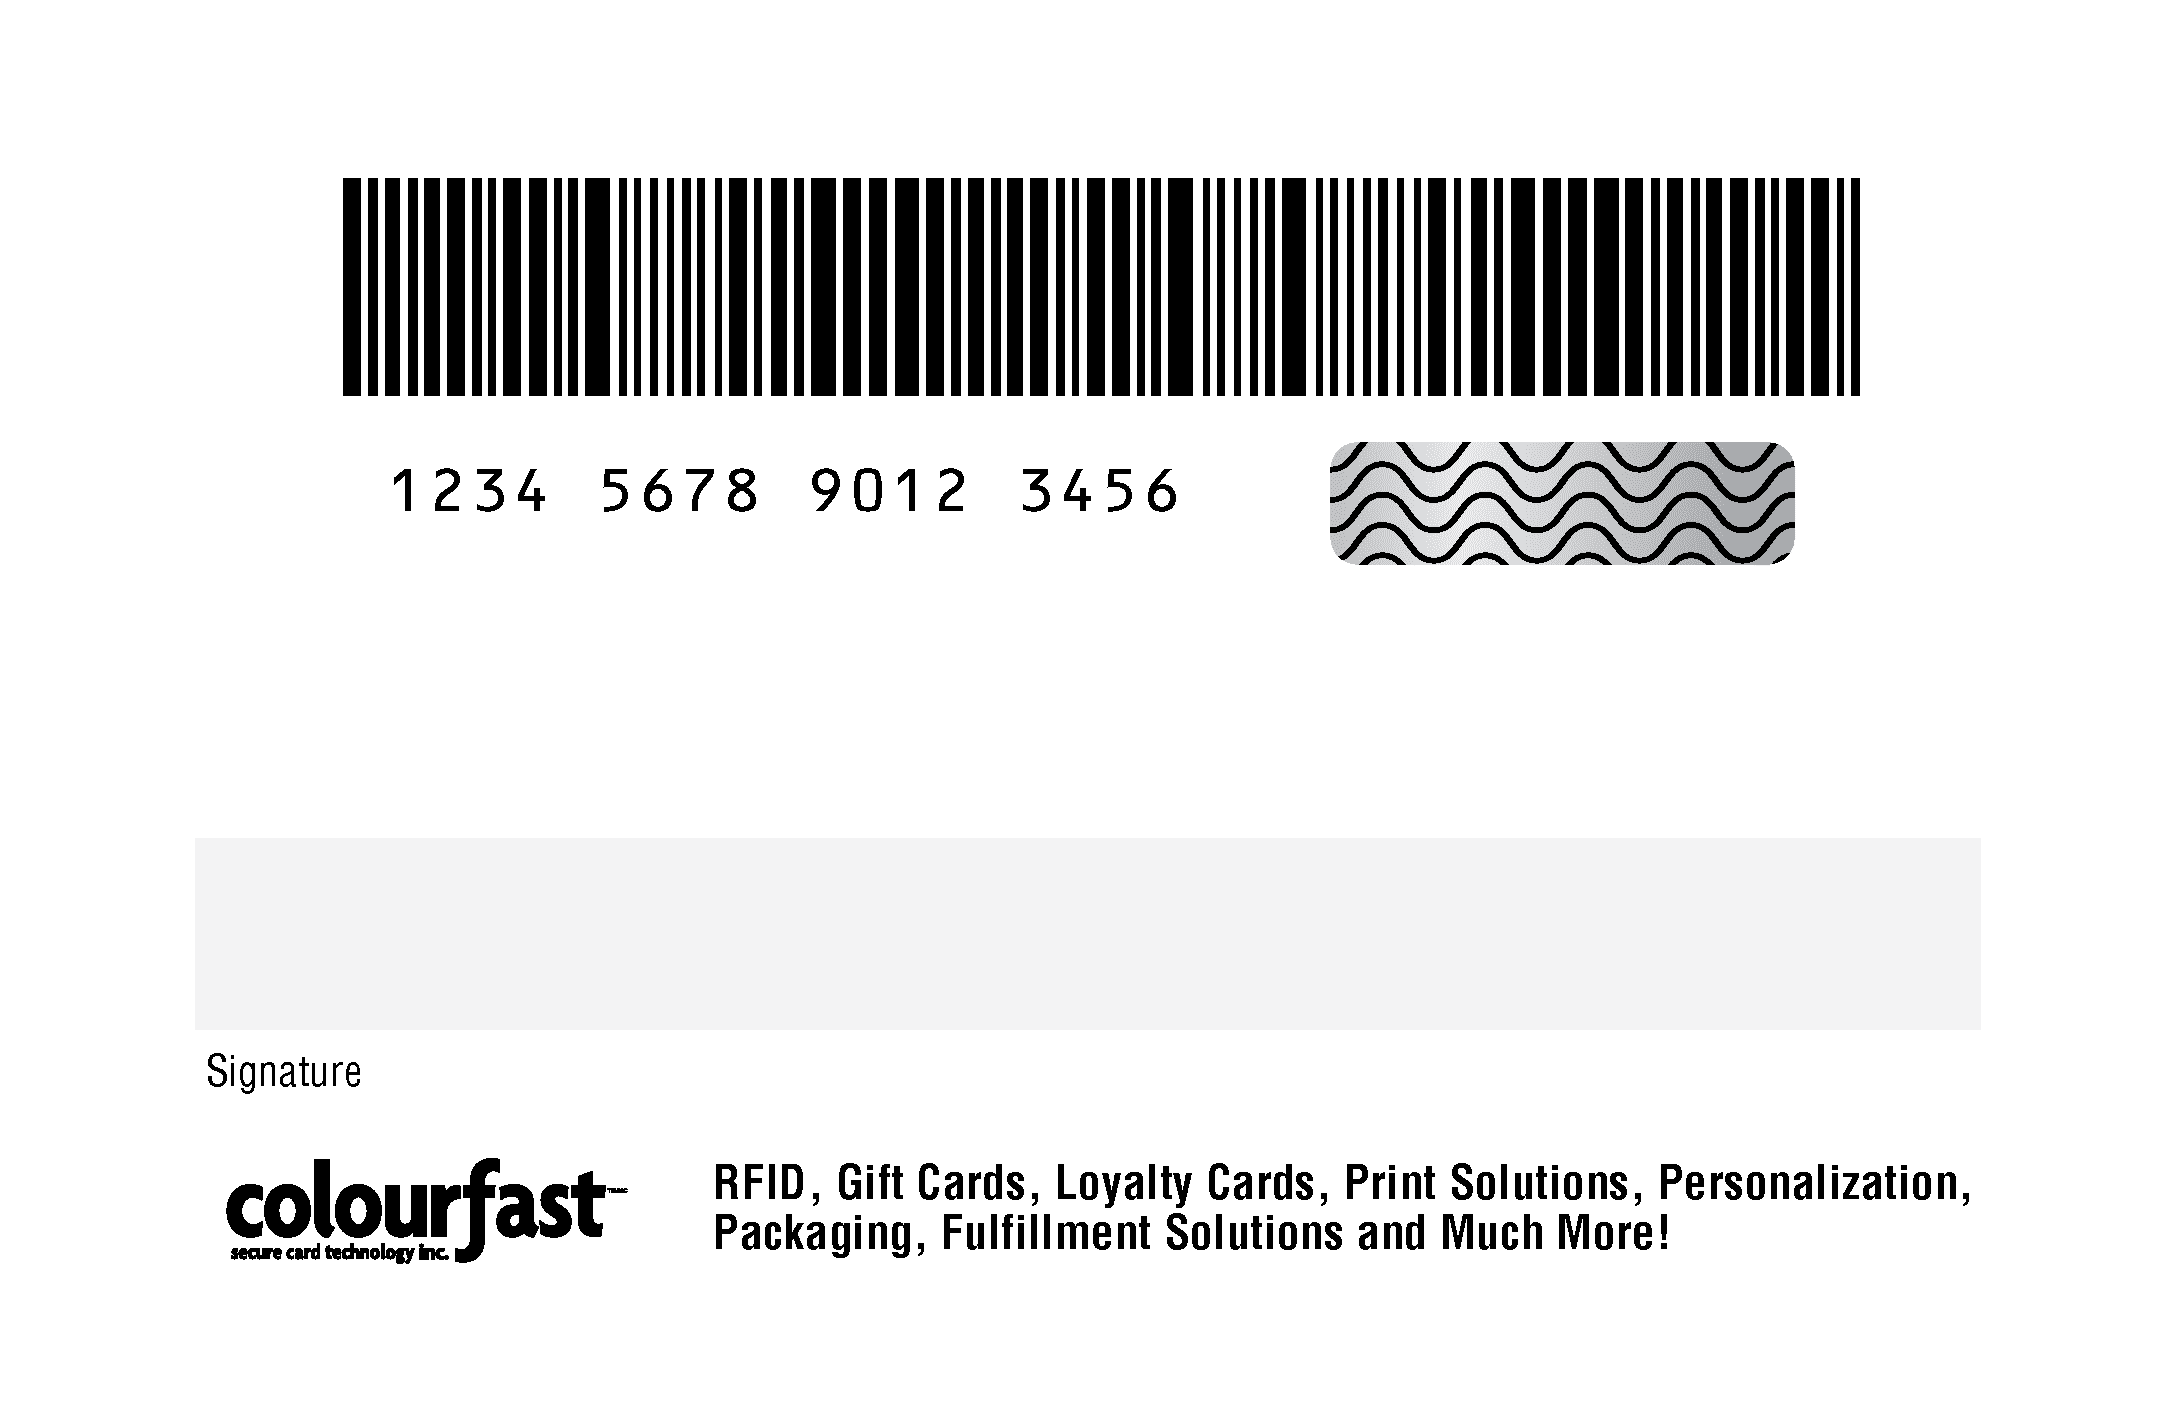 Featured image for “Variable Barcode, Human-readable number, Signature Panel, Scratch Off Panel”